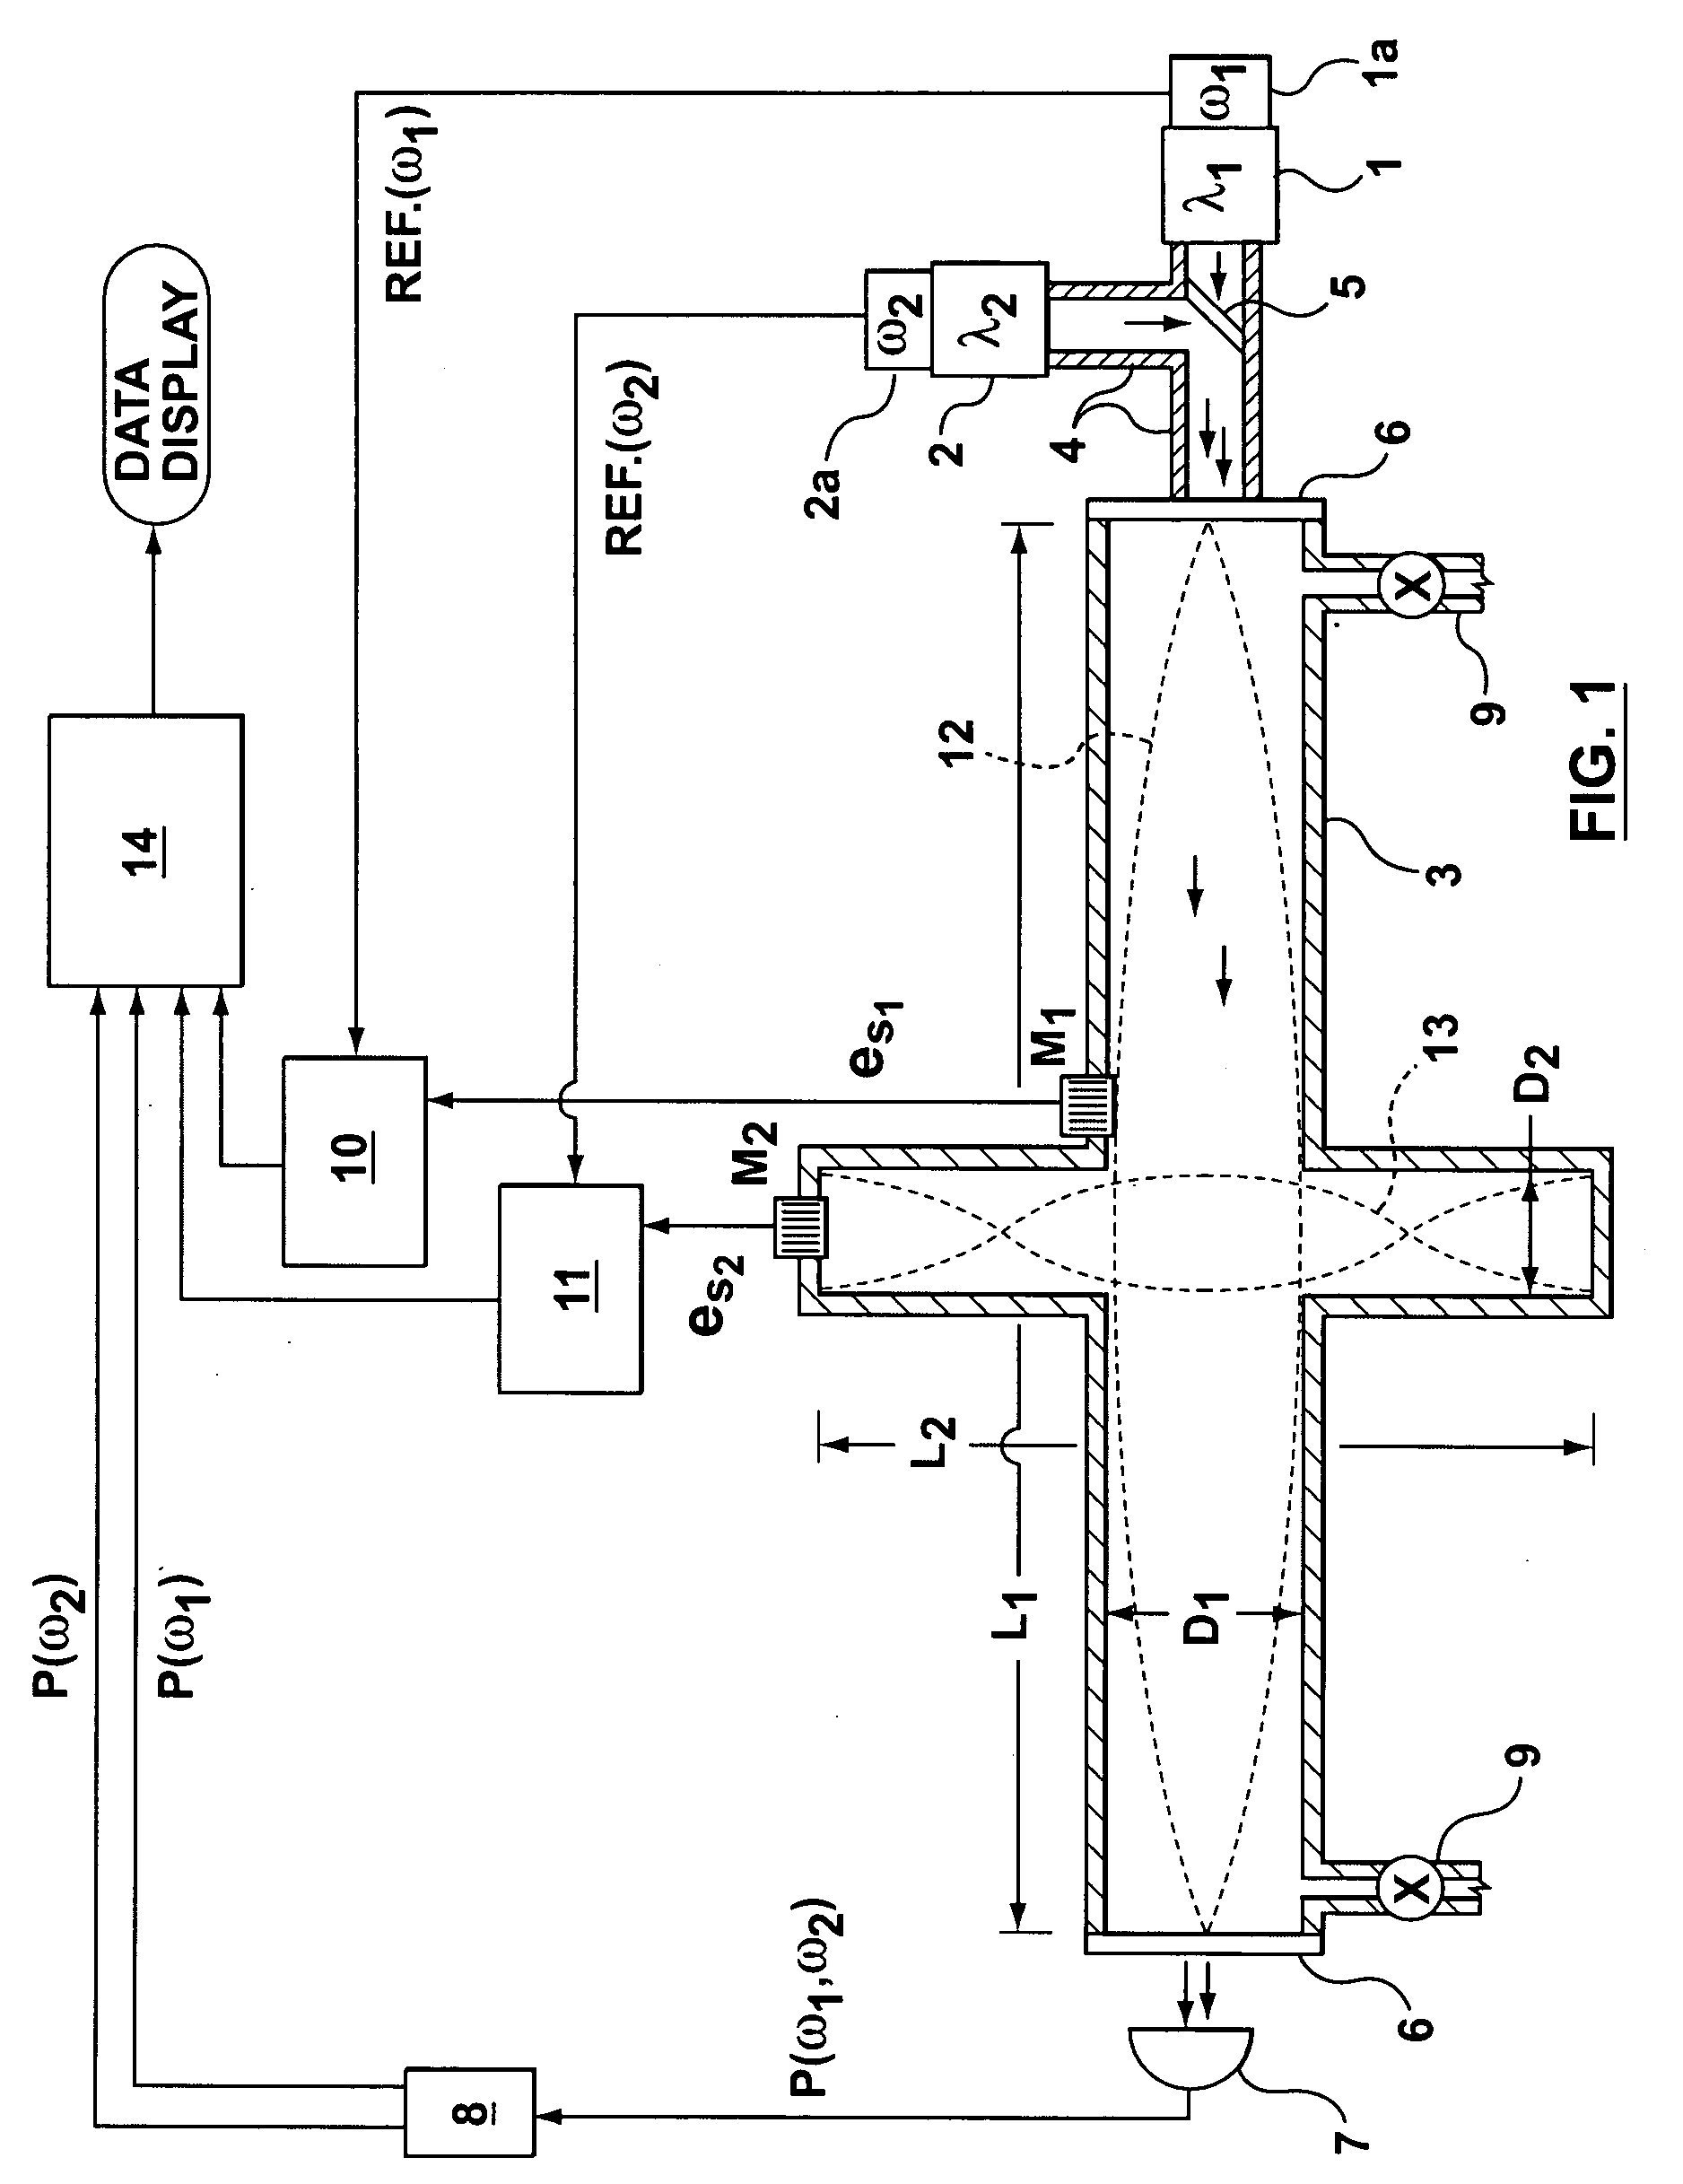 Method of identifying and detecting the concentrations of multiple species by means of a spectrophone